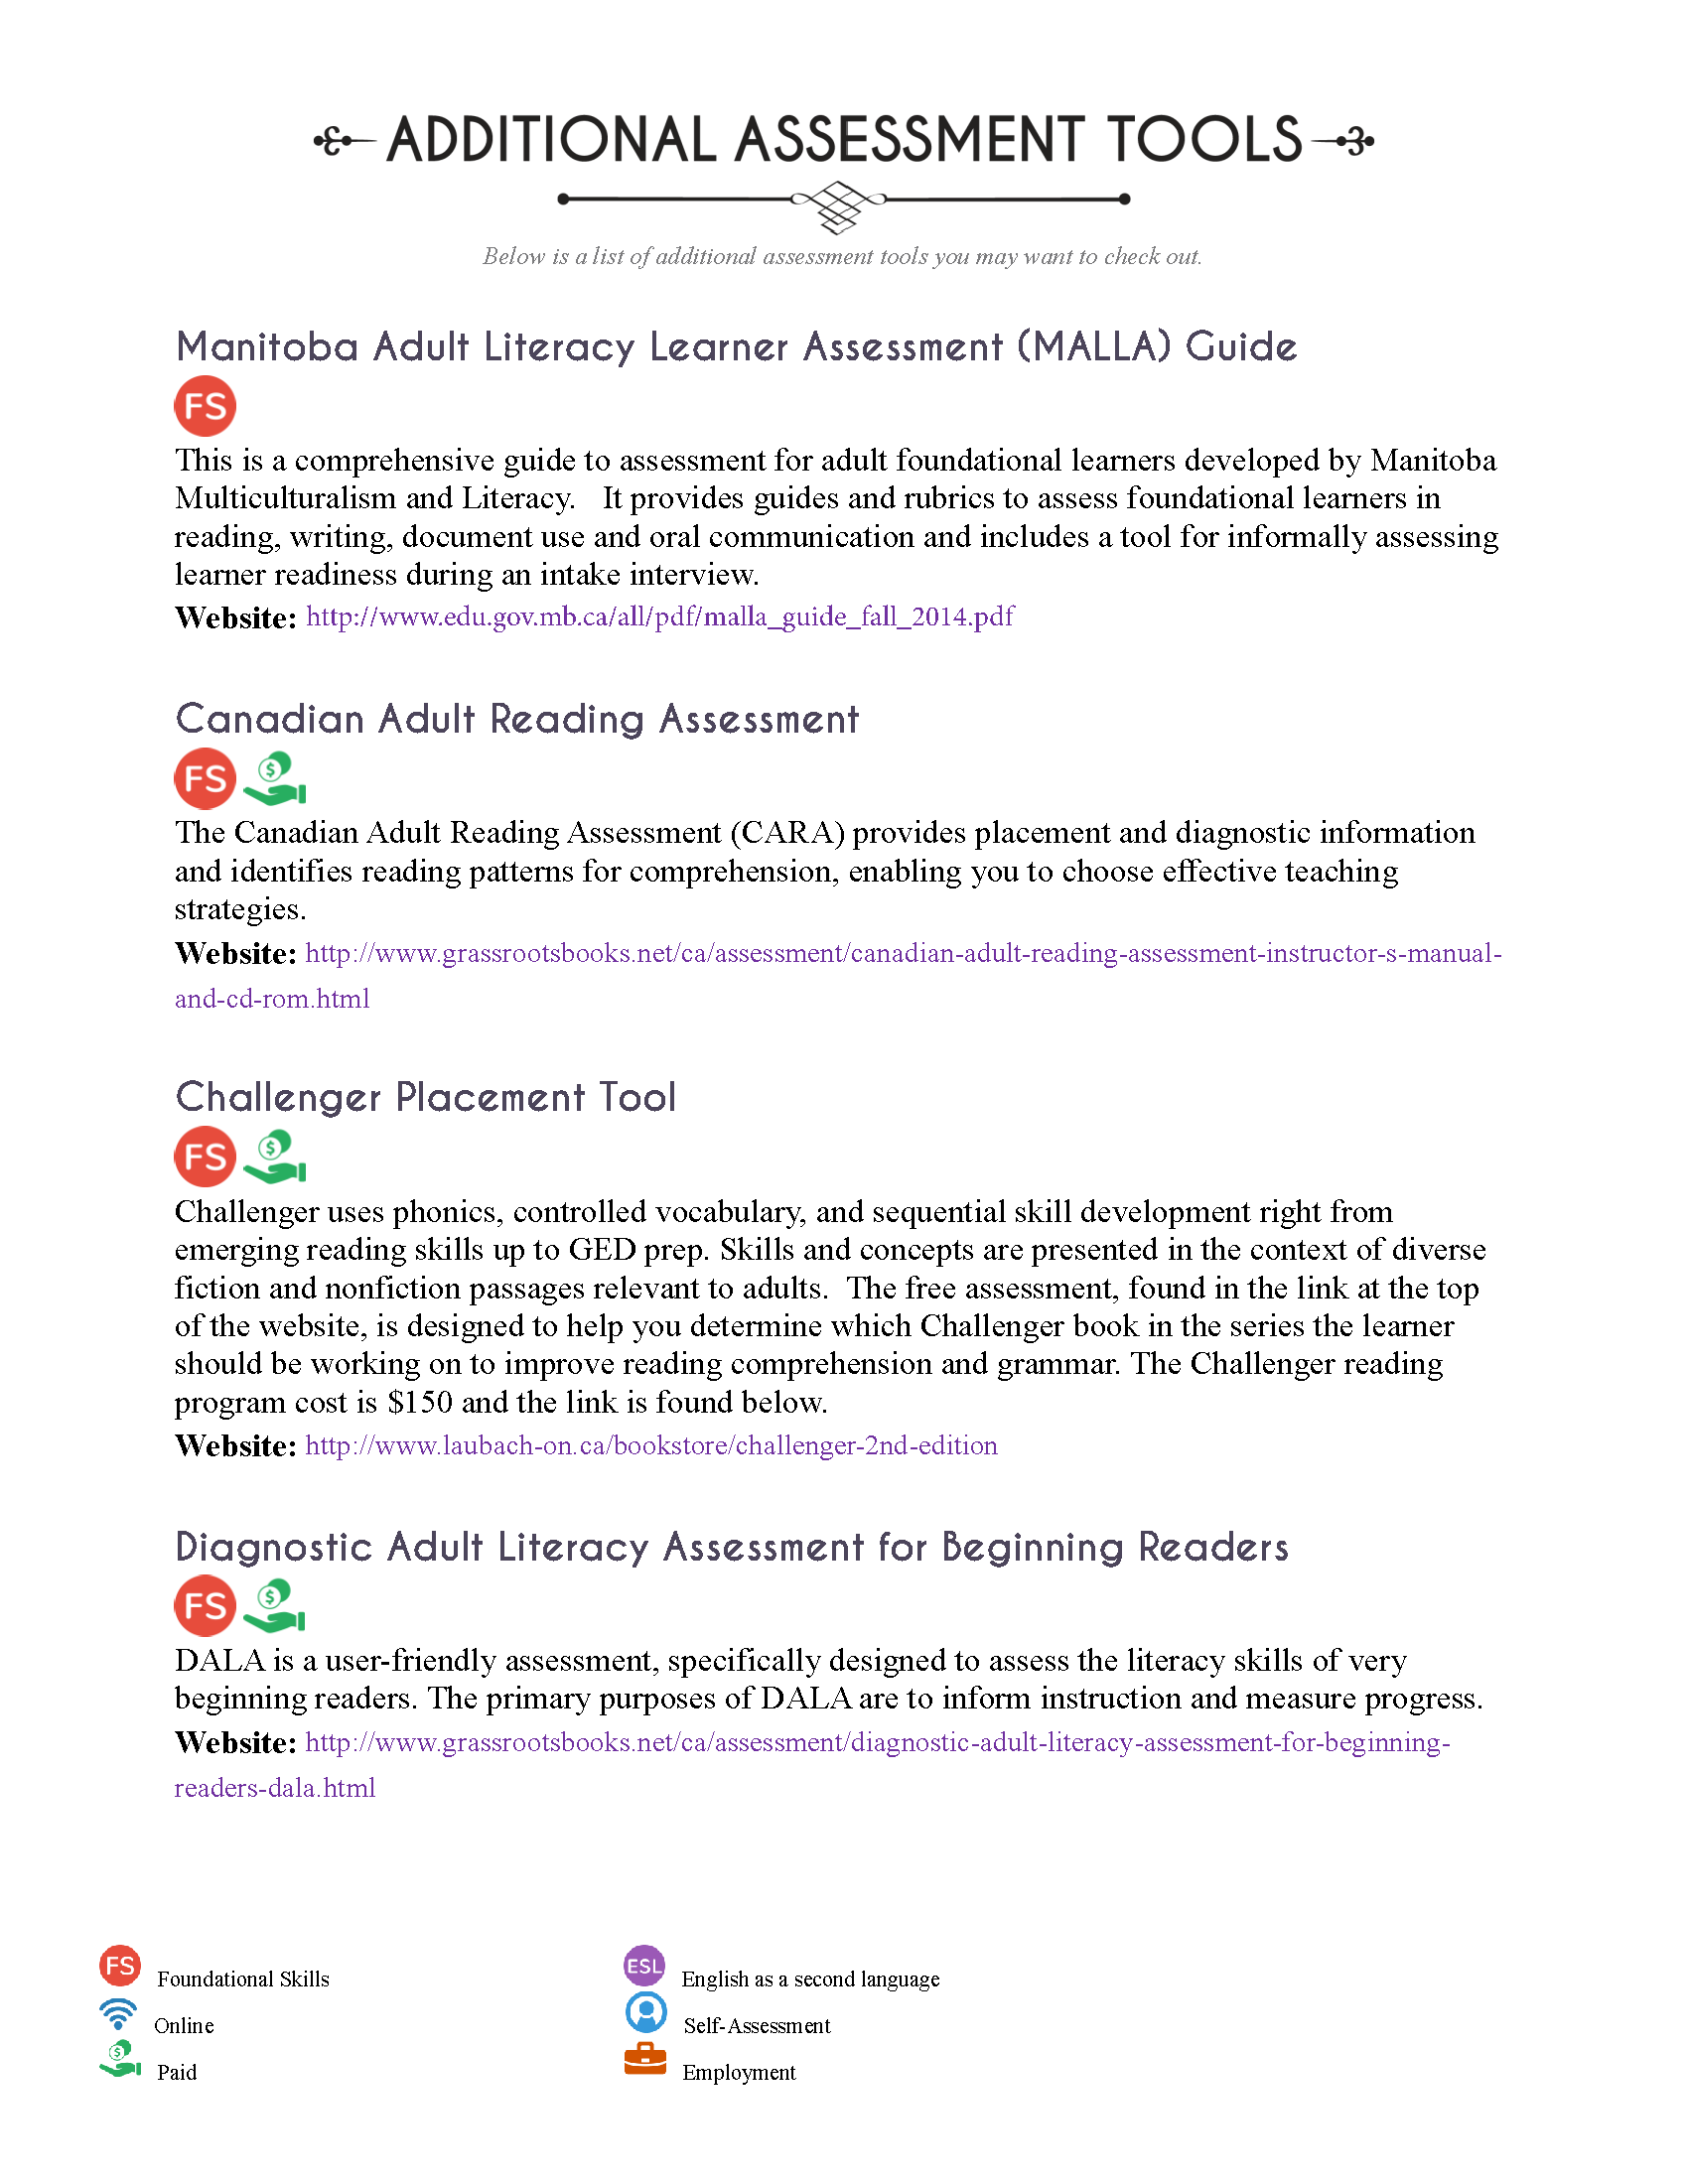 List of Additional Assessment Tools